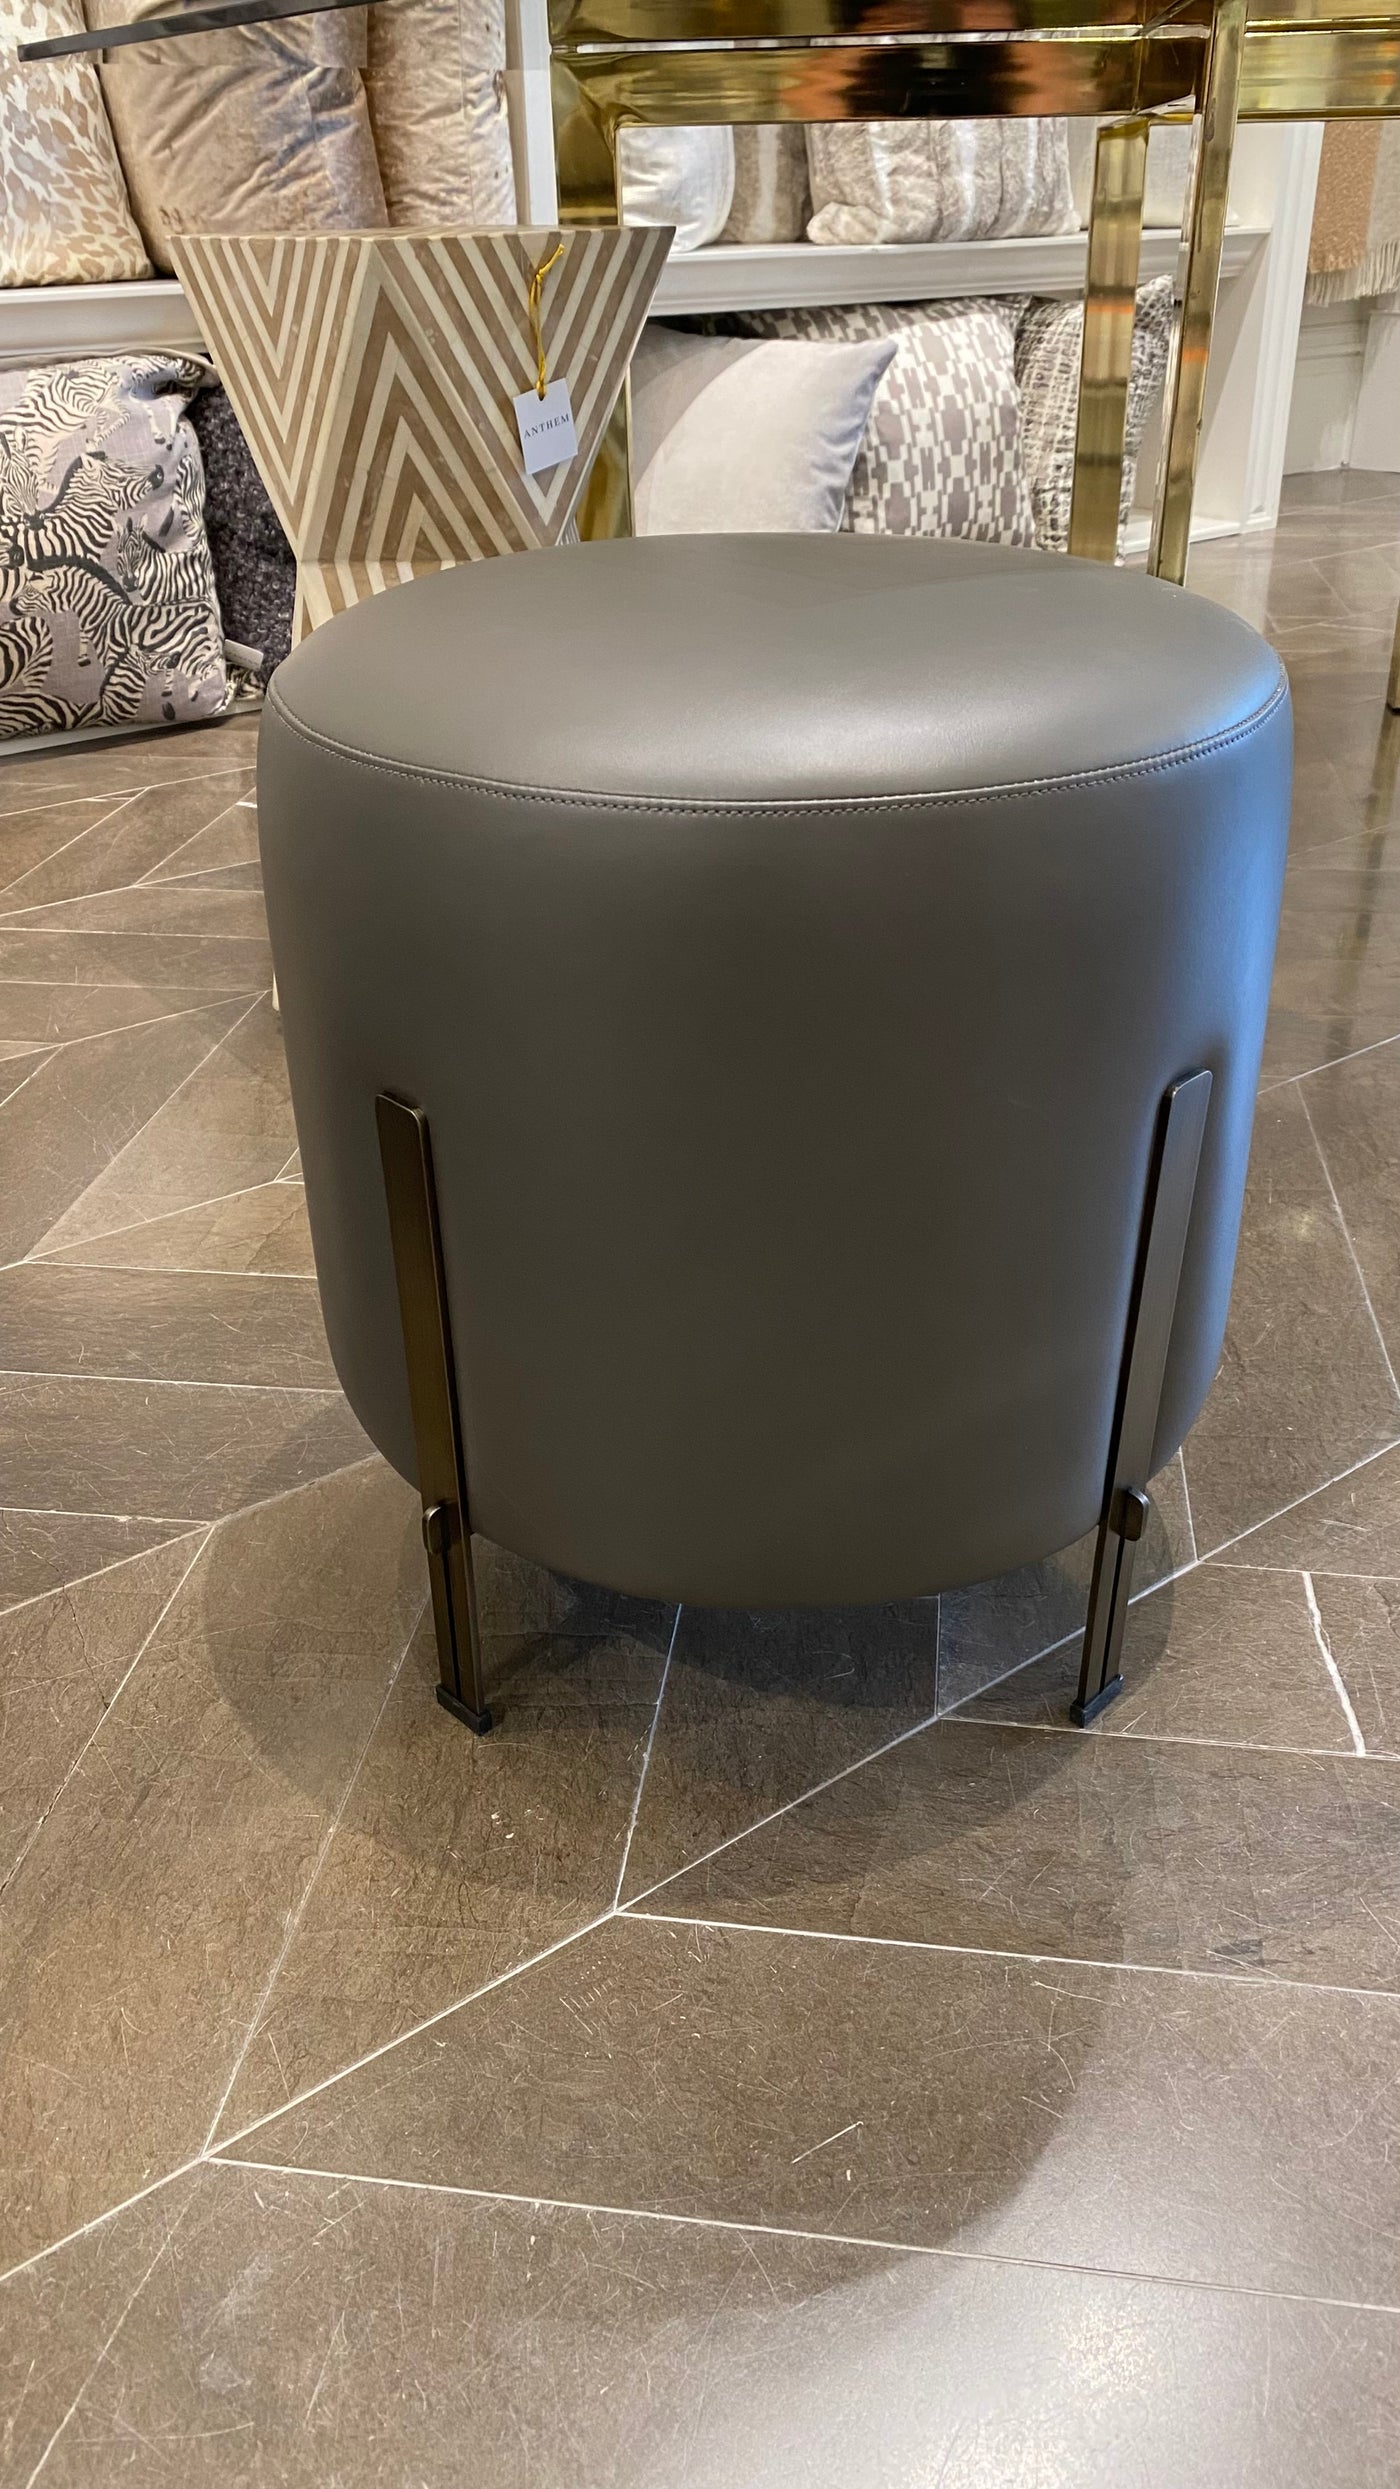 STOOL GREY LEATHER WITH BRONZE LEGS